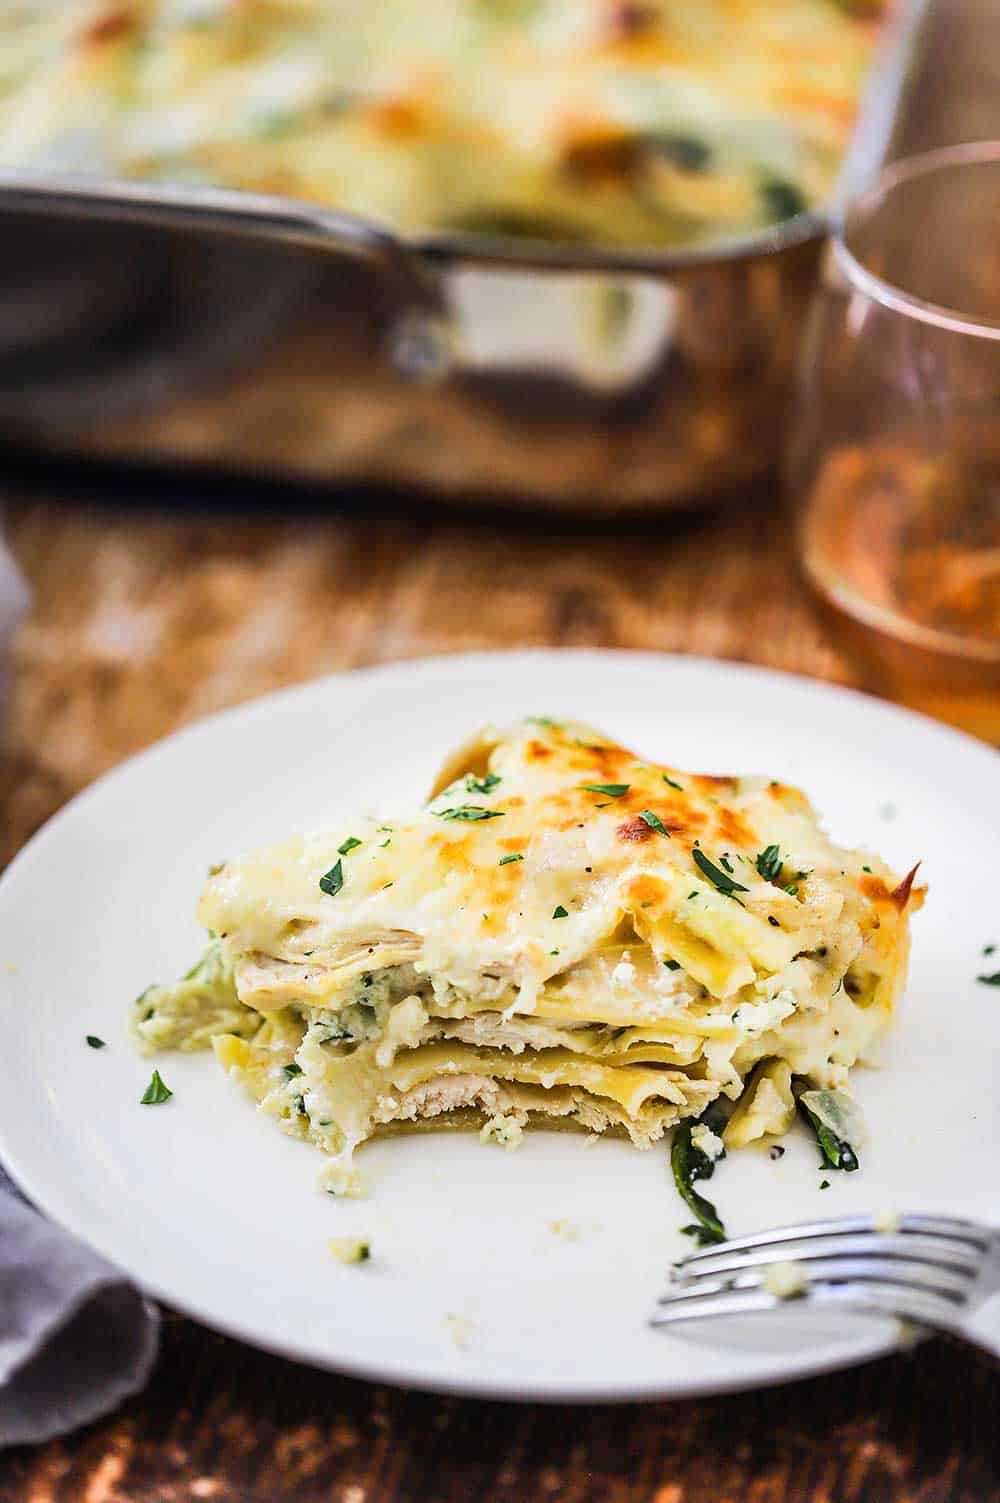 A white plate holding a serving of a white chicken lasagna with spinach with a bite taken out.